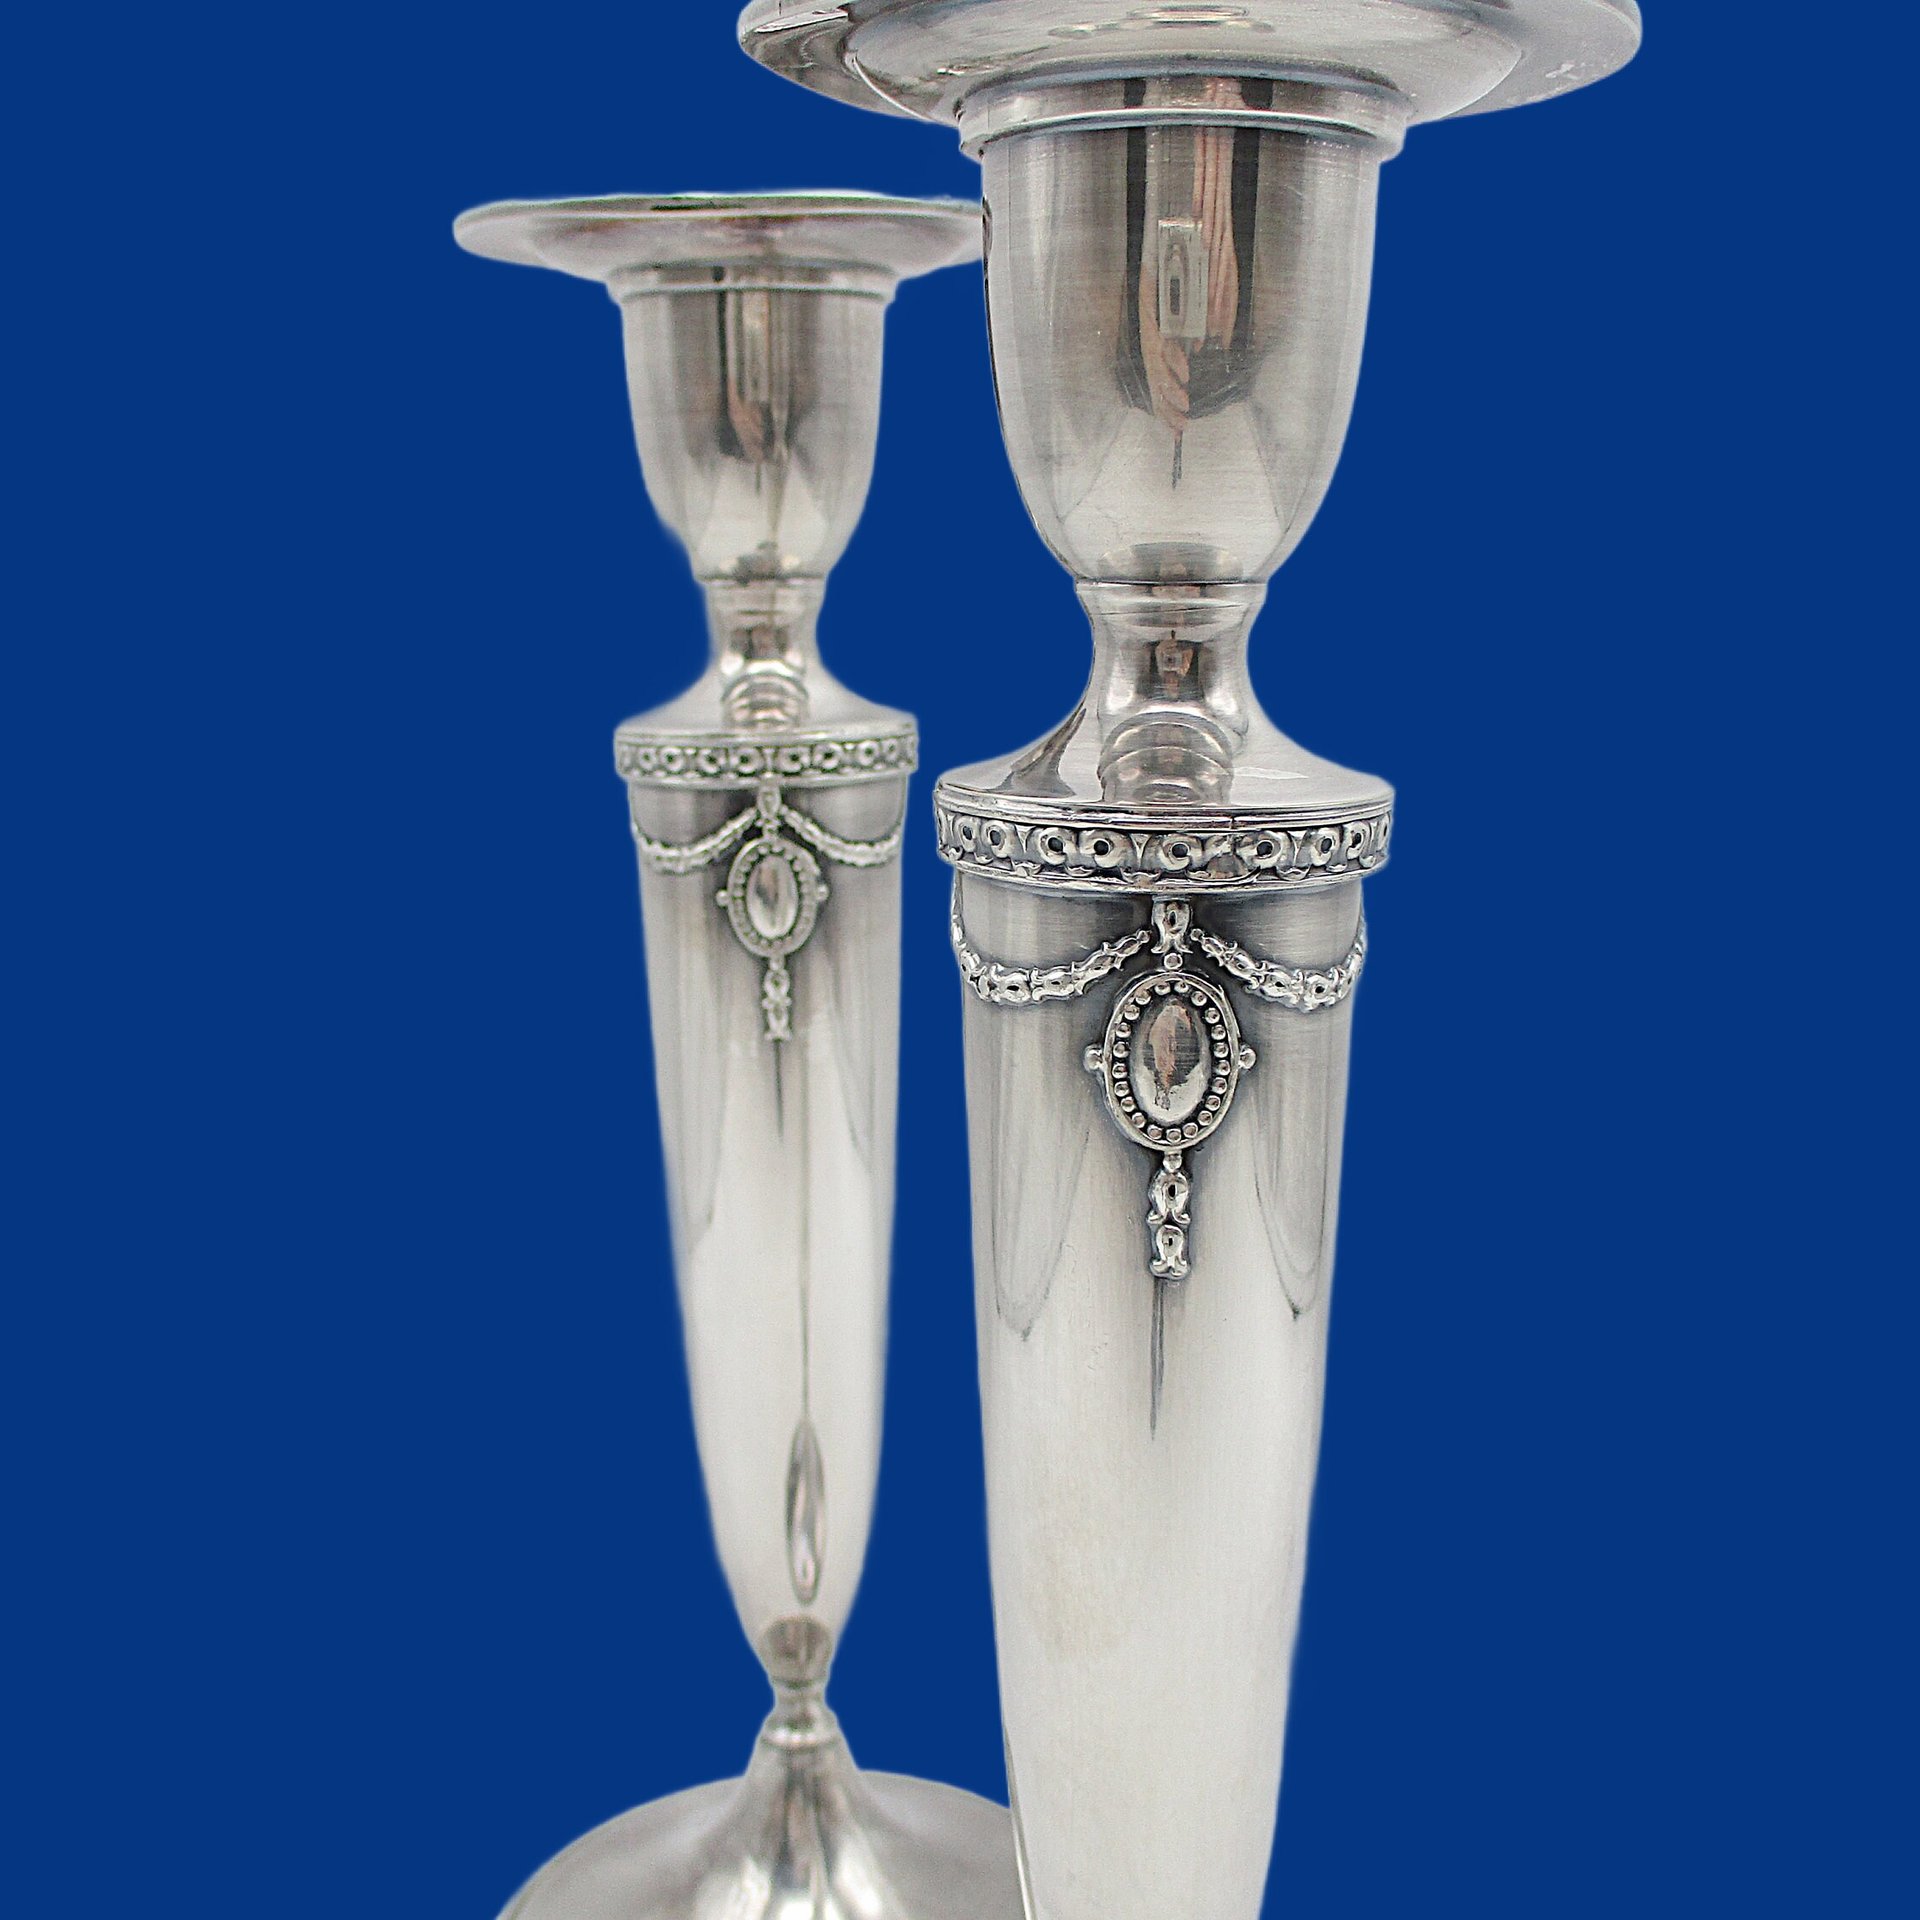 Antique Wallace Dorothy Q Candle Holders, Set of 2, Silverplate, 9 Inch, 6684N, Wedding or Anniversary Gift